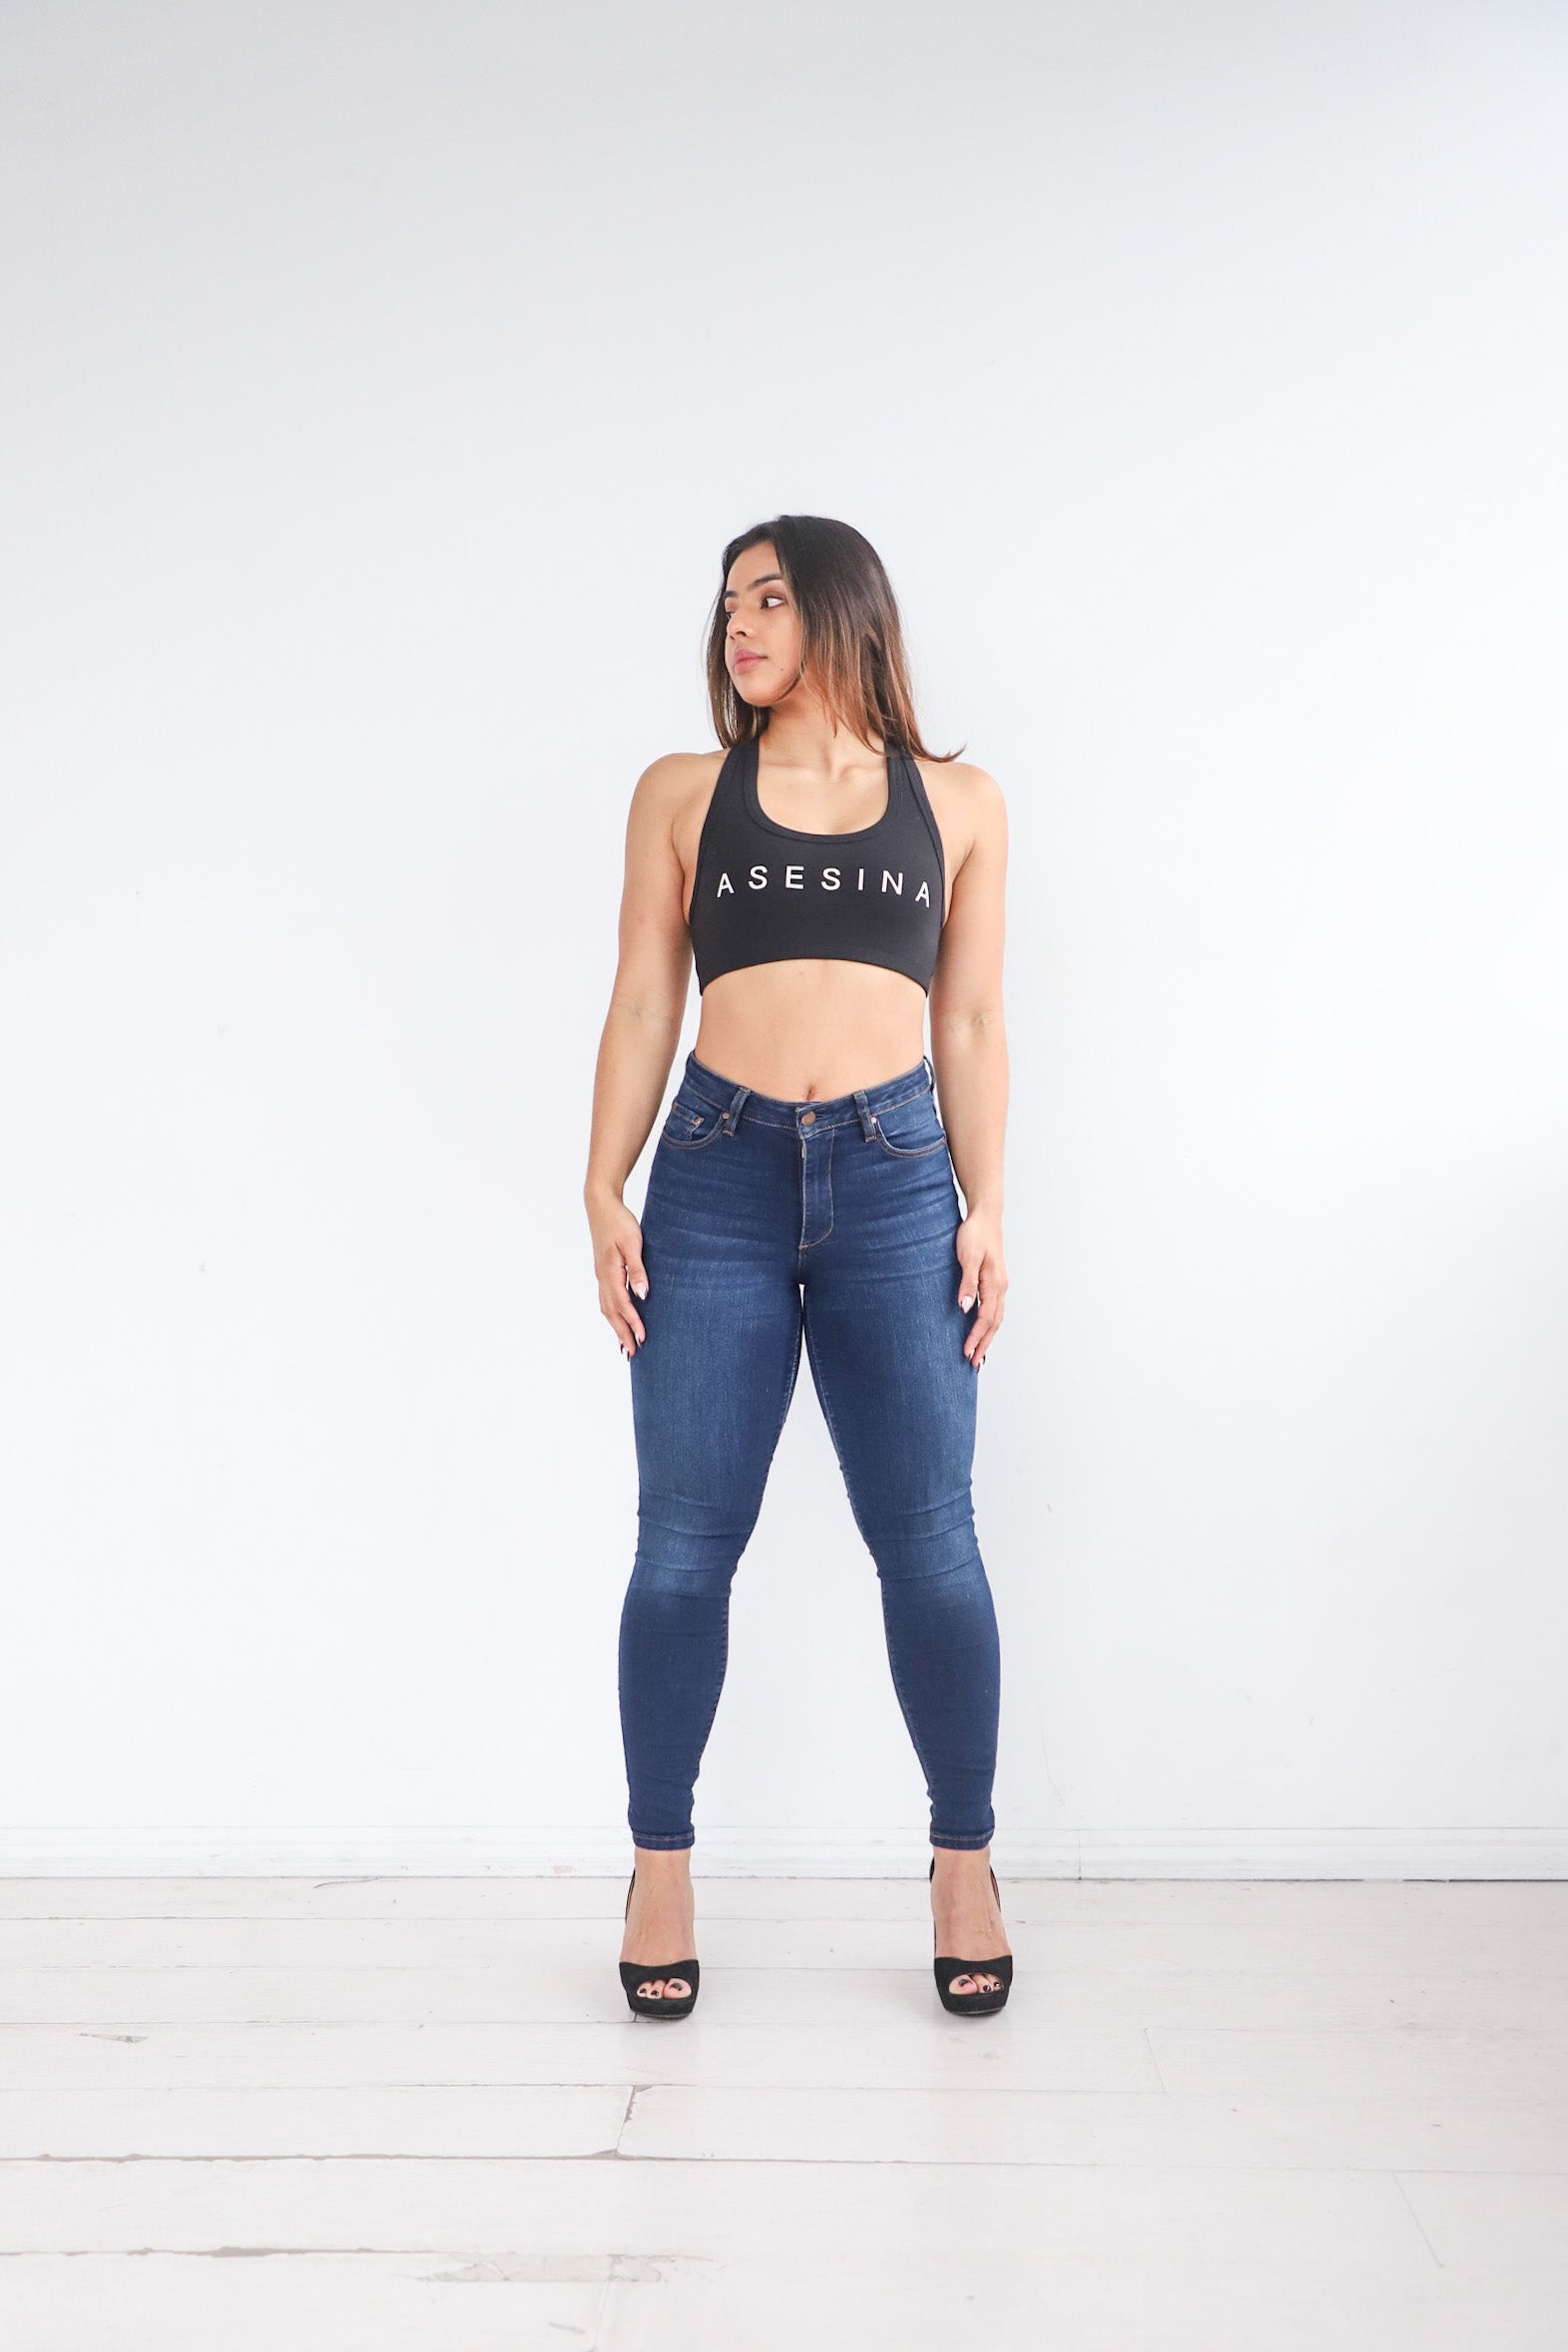 Alicia wearing the Power Jeans posing to the front. The Power Jeans are made for the athletic body fitting your hips, thighs, and waist. Alicia is 5'3 with a 29 inch waist, 38 inch hips, and is wearing a size 27.